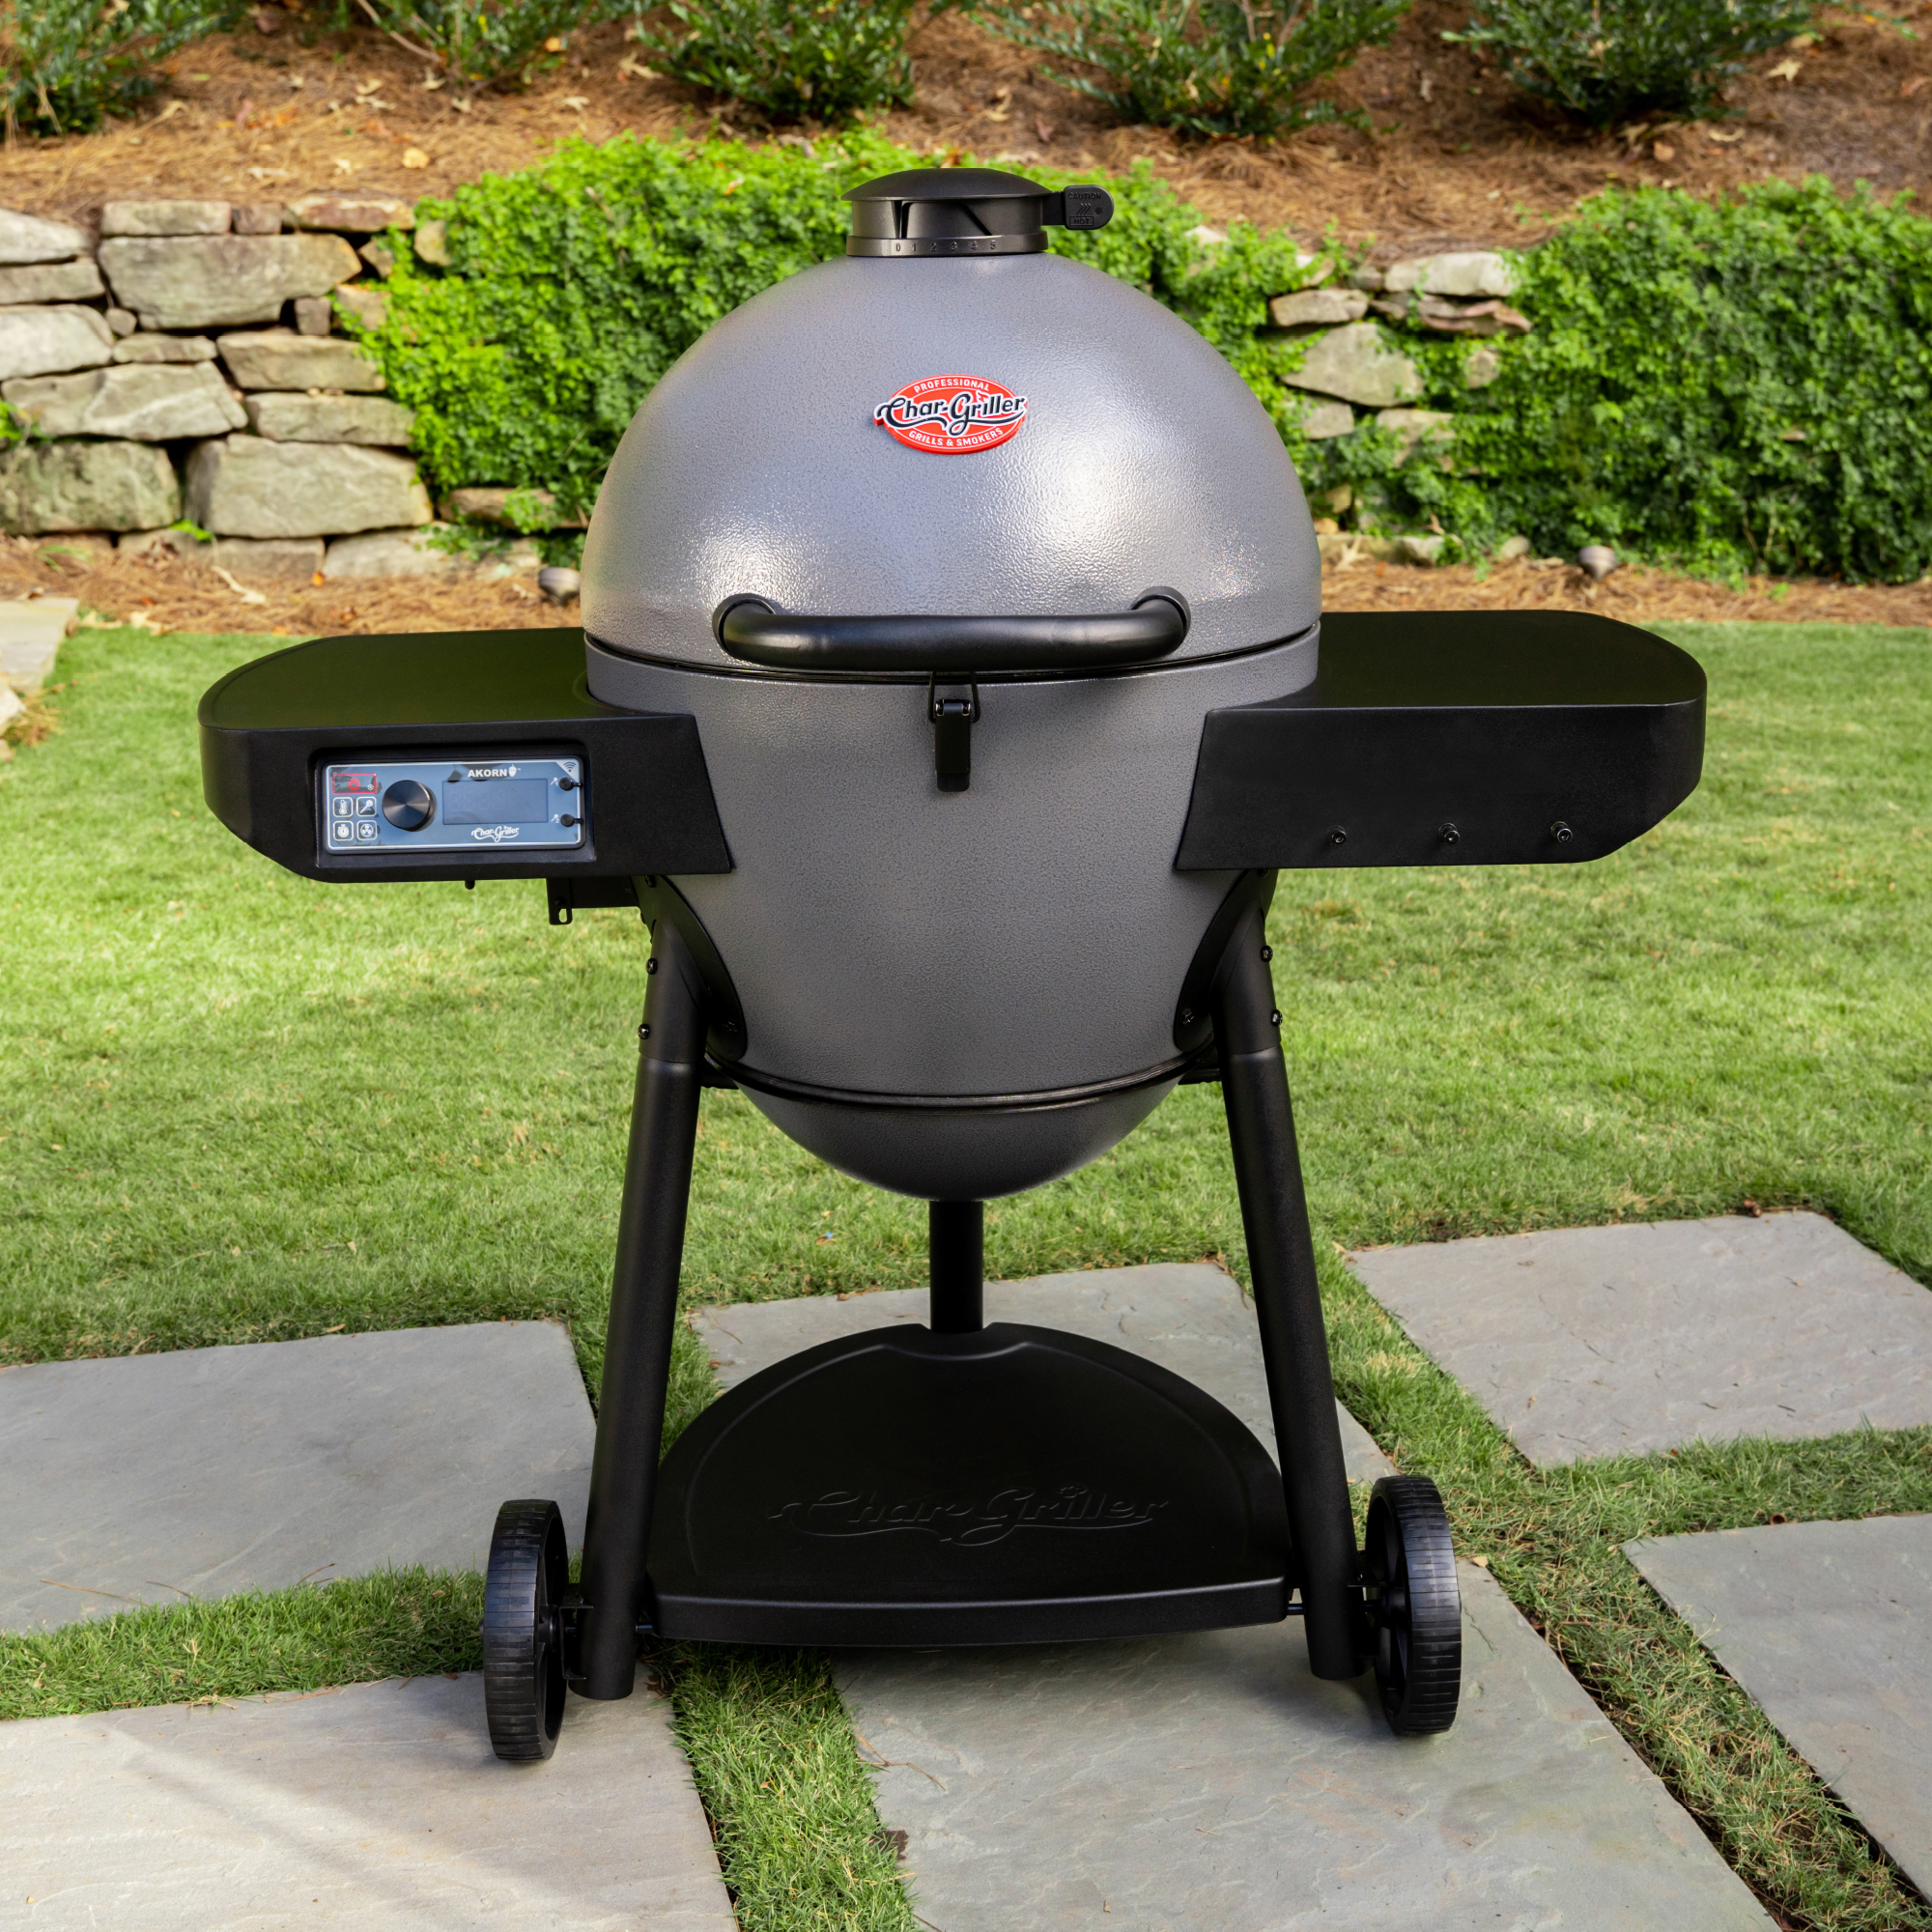 Auto Kamado Charcoal Grill in Gray - image 2 of 15